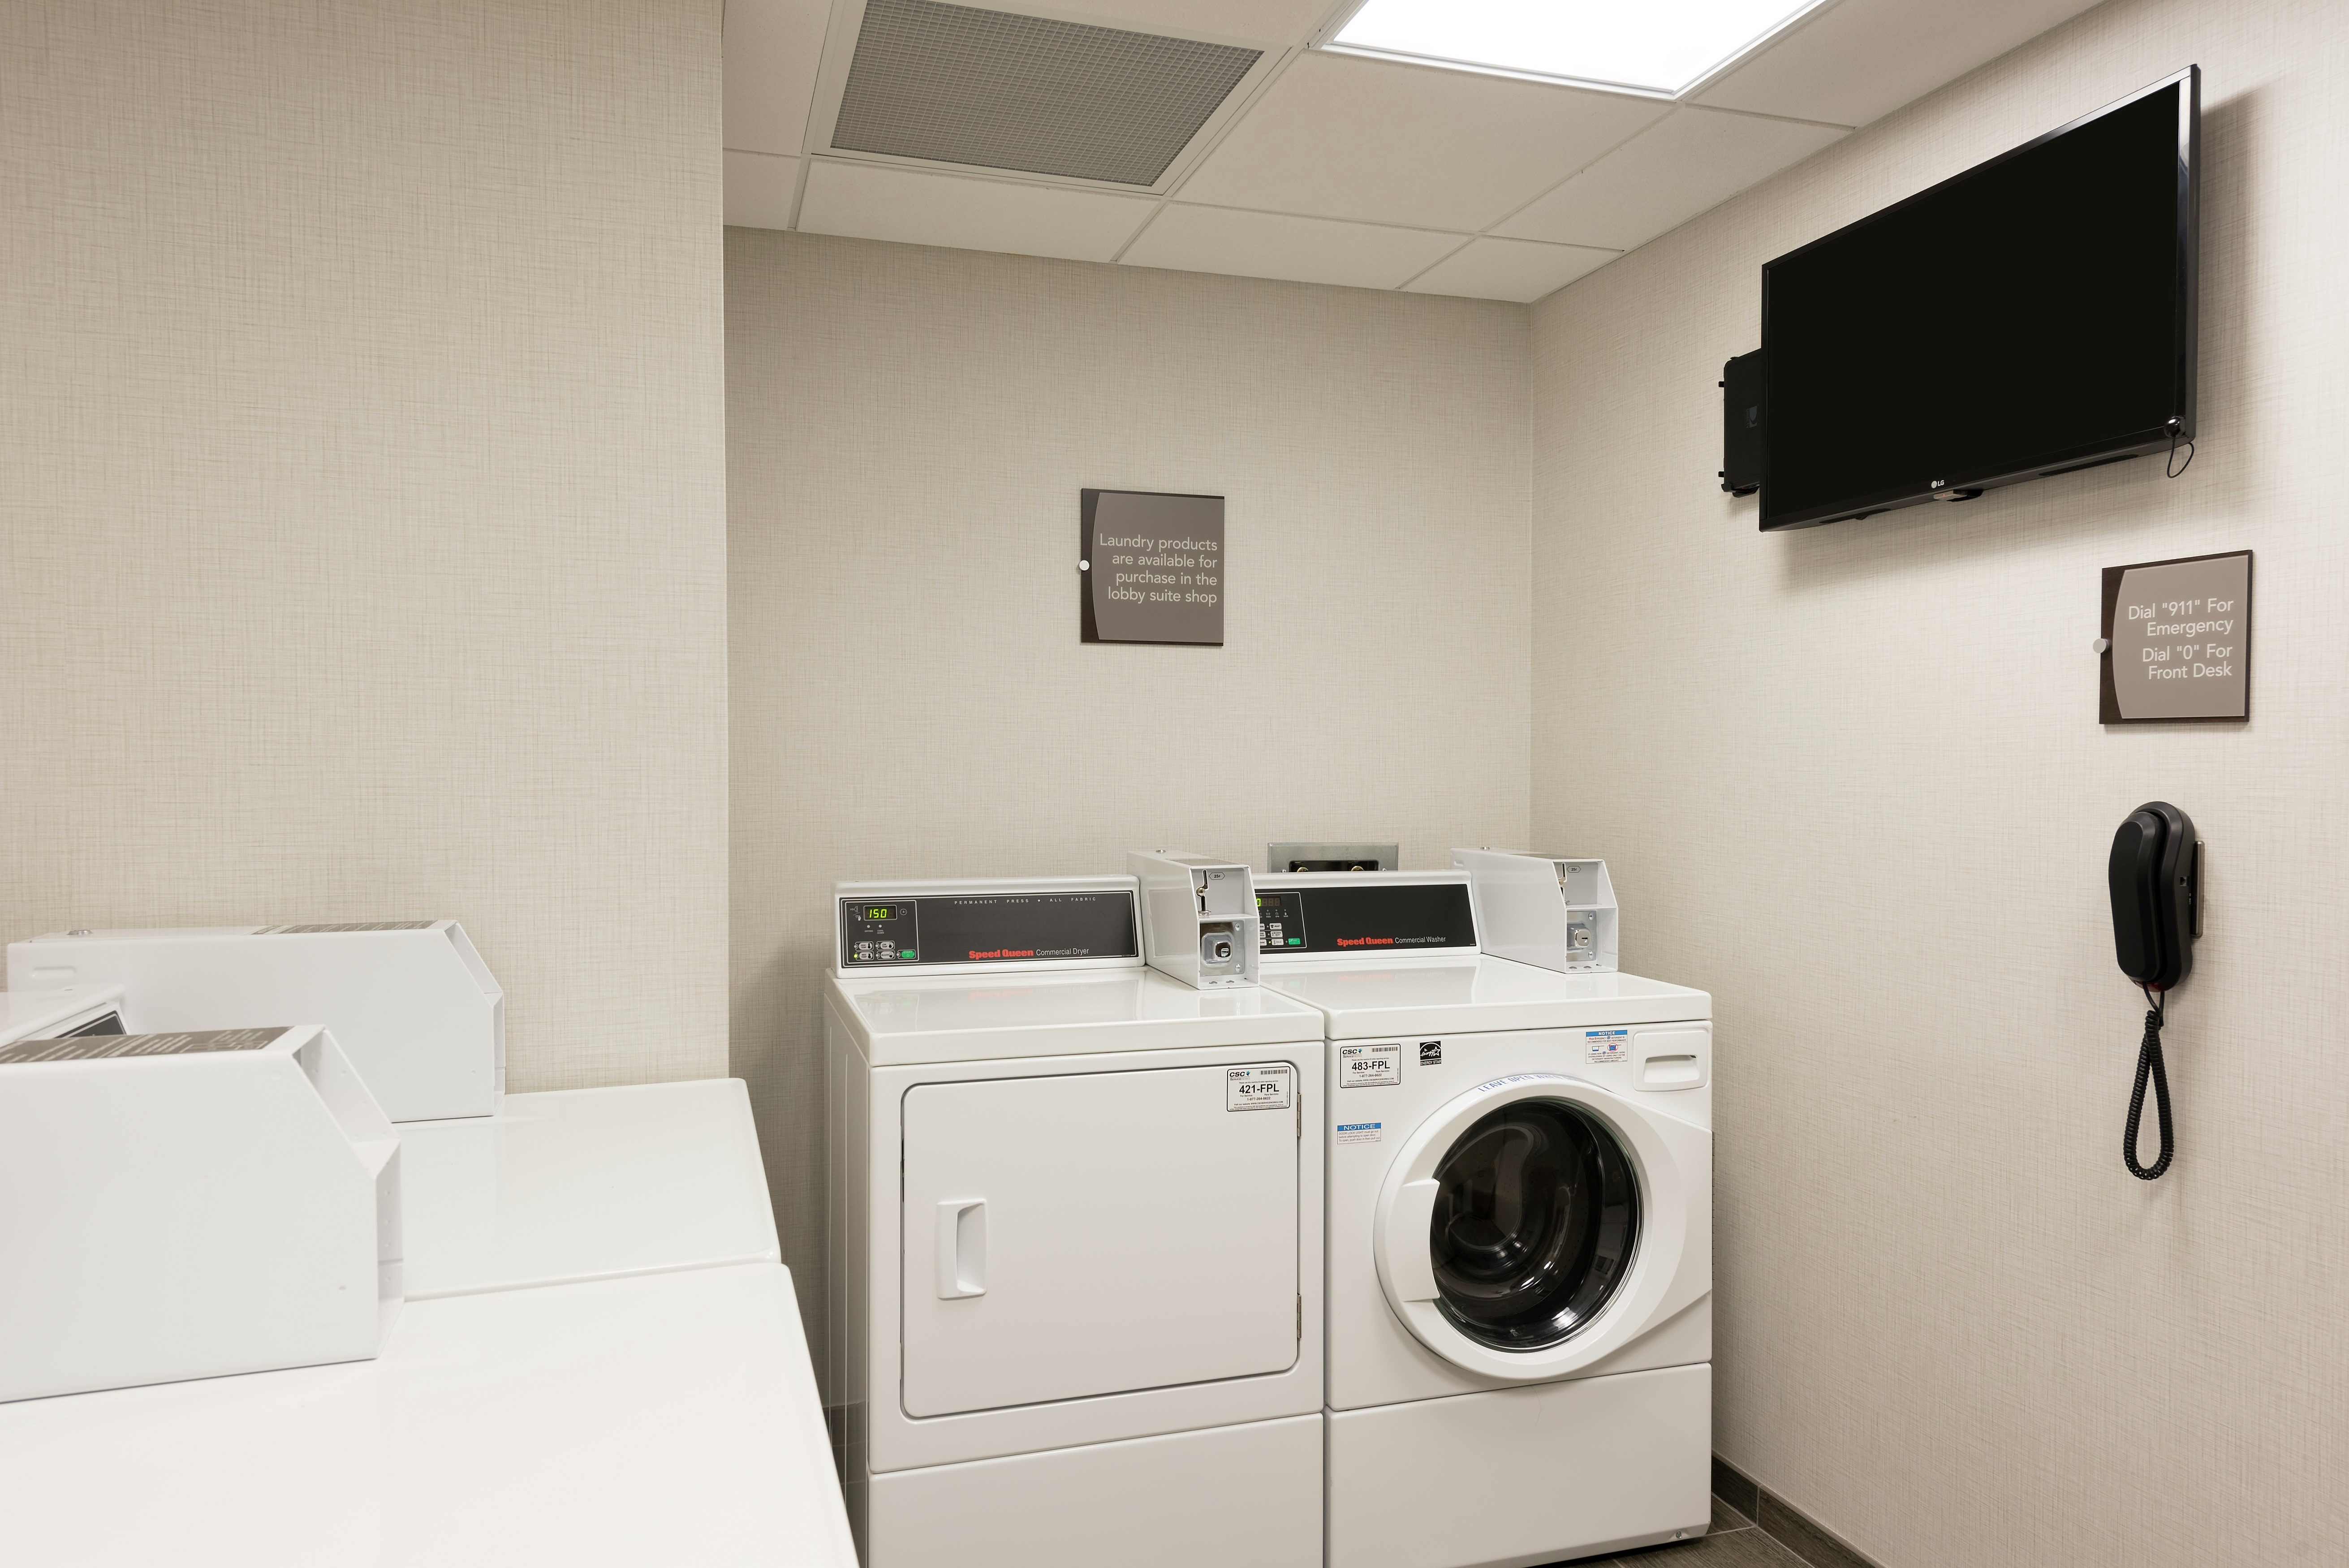 Coin Operated Washing and Drying Machines, TV, Signage, and Phone in Guest Laundry Area